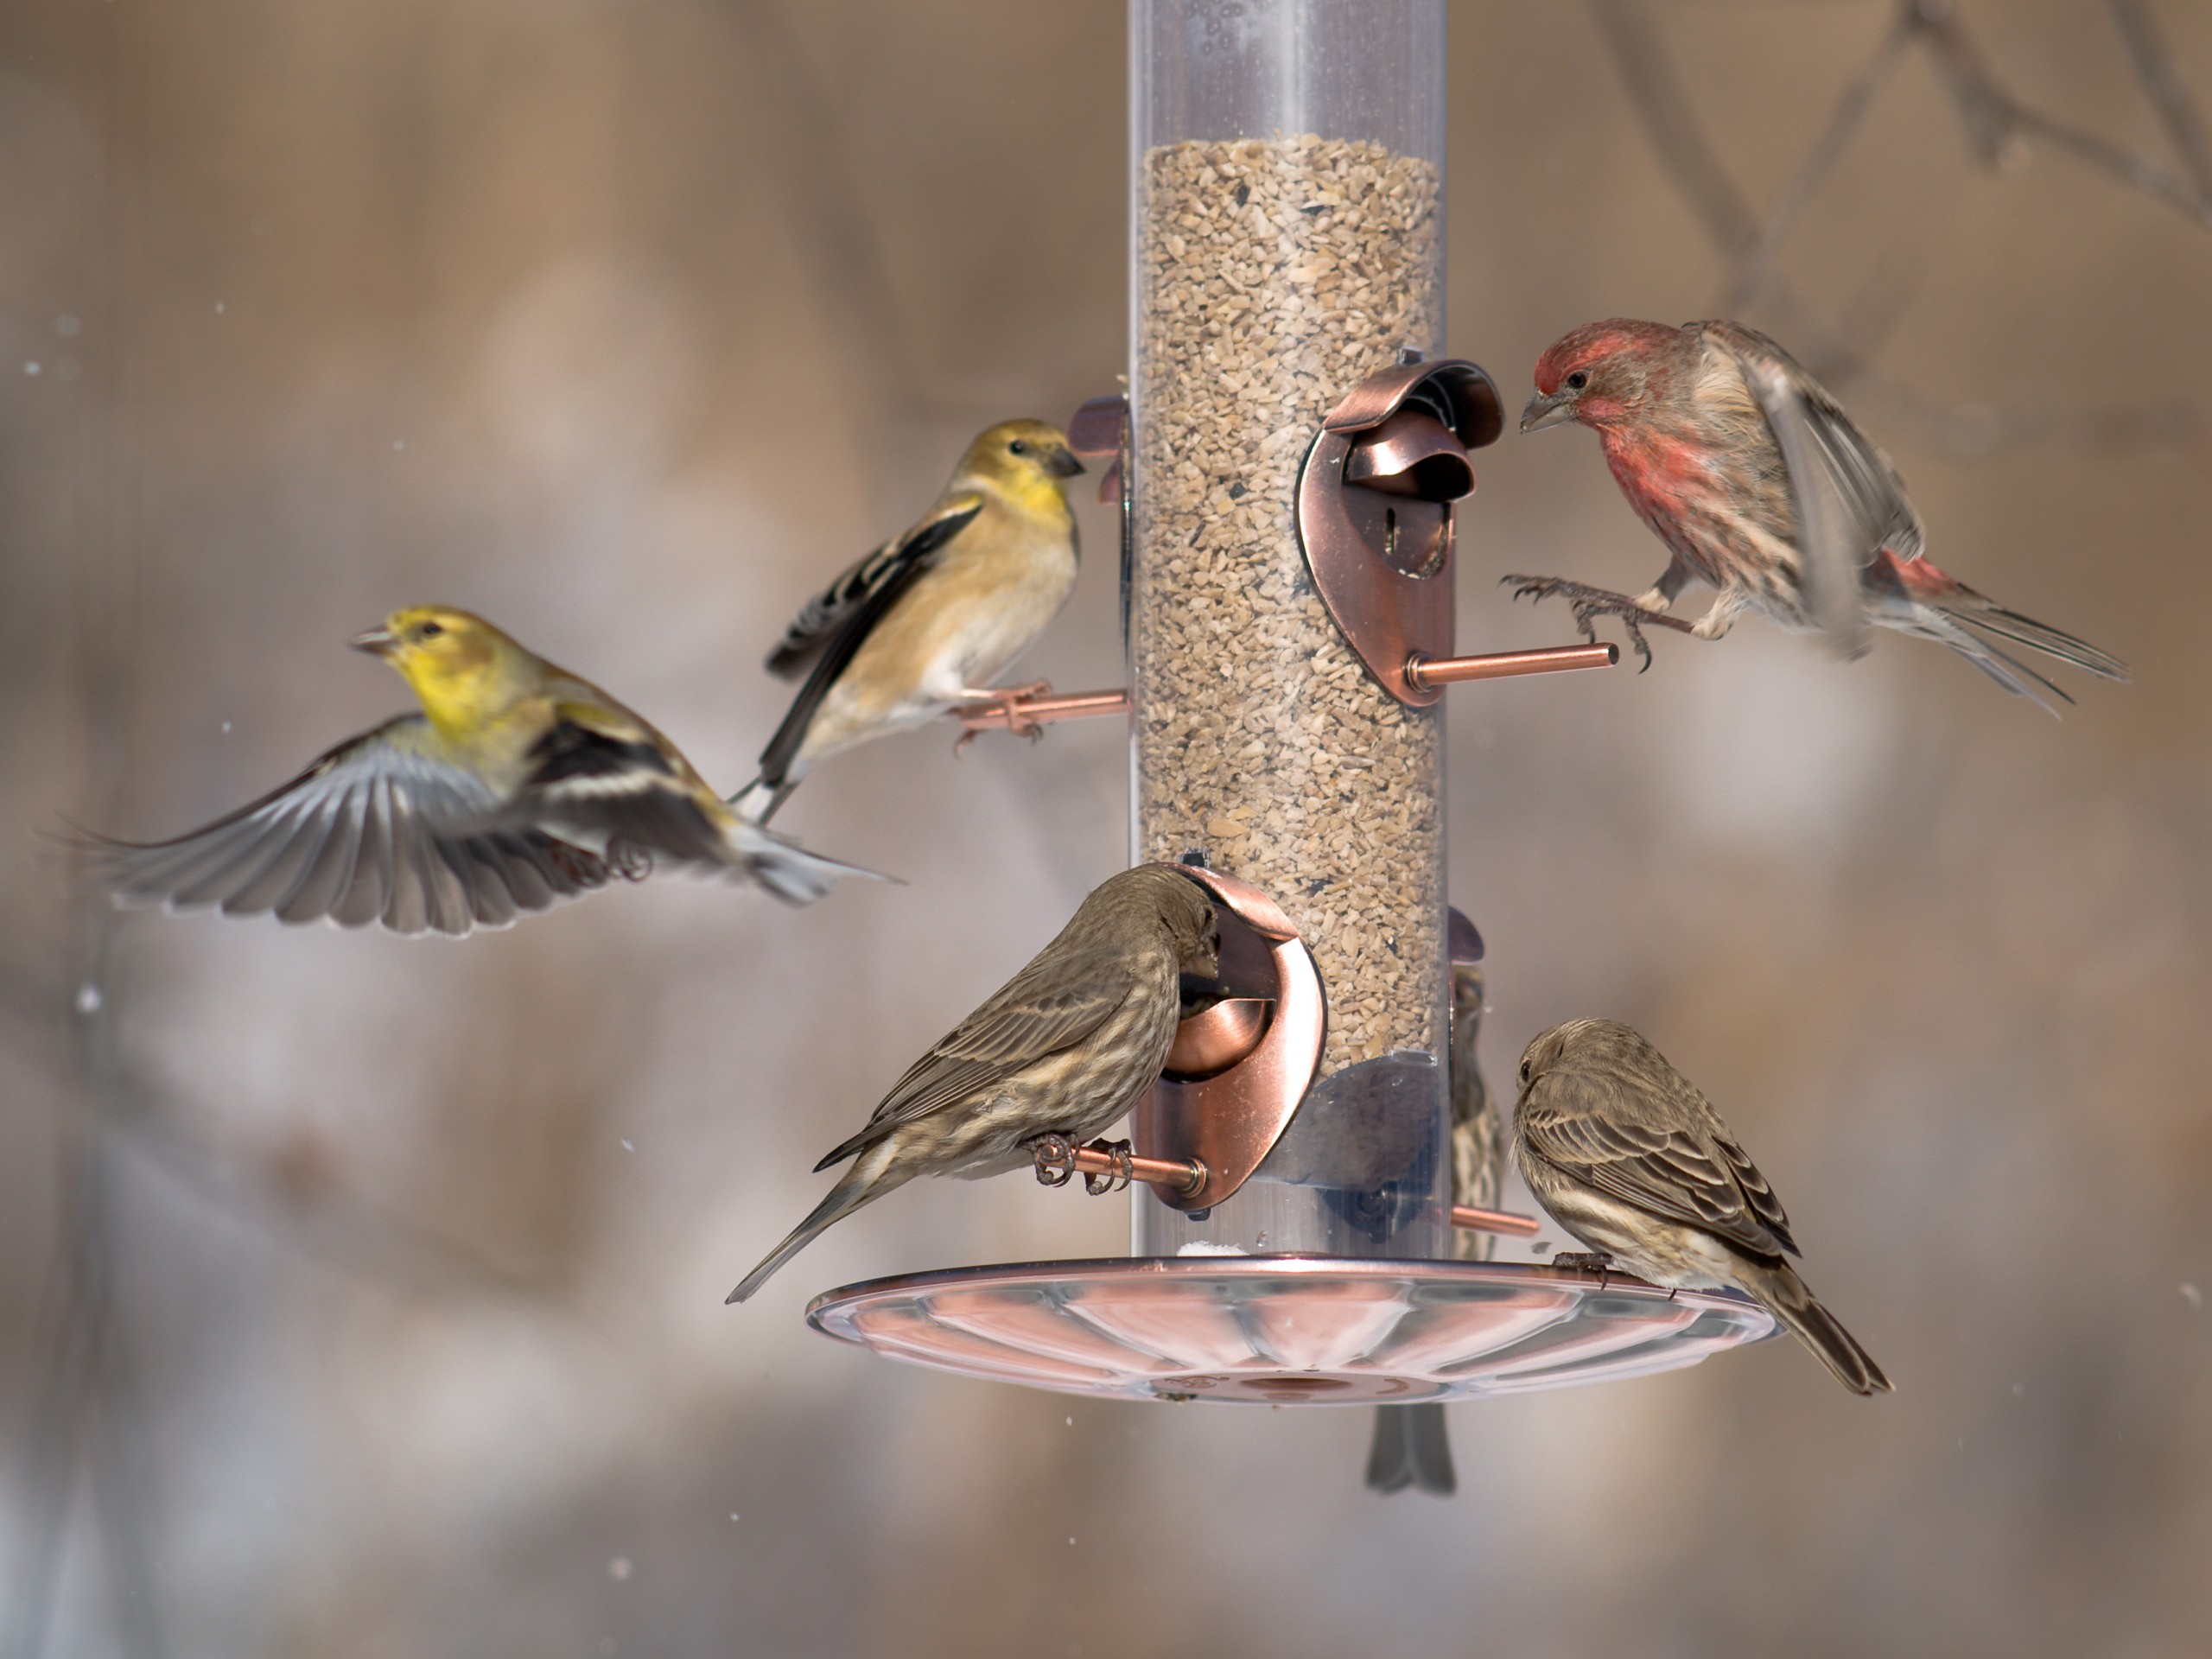 Variety of finches at feeder in winter